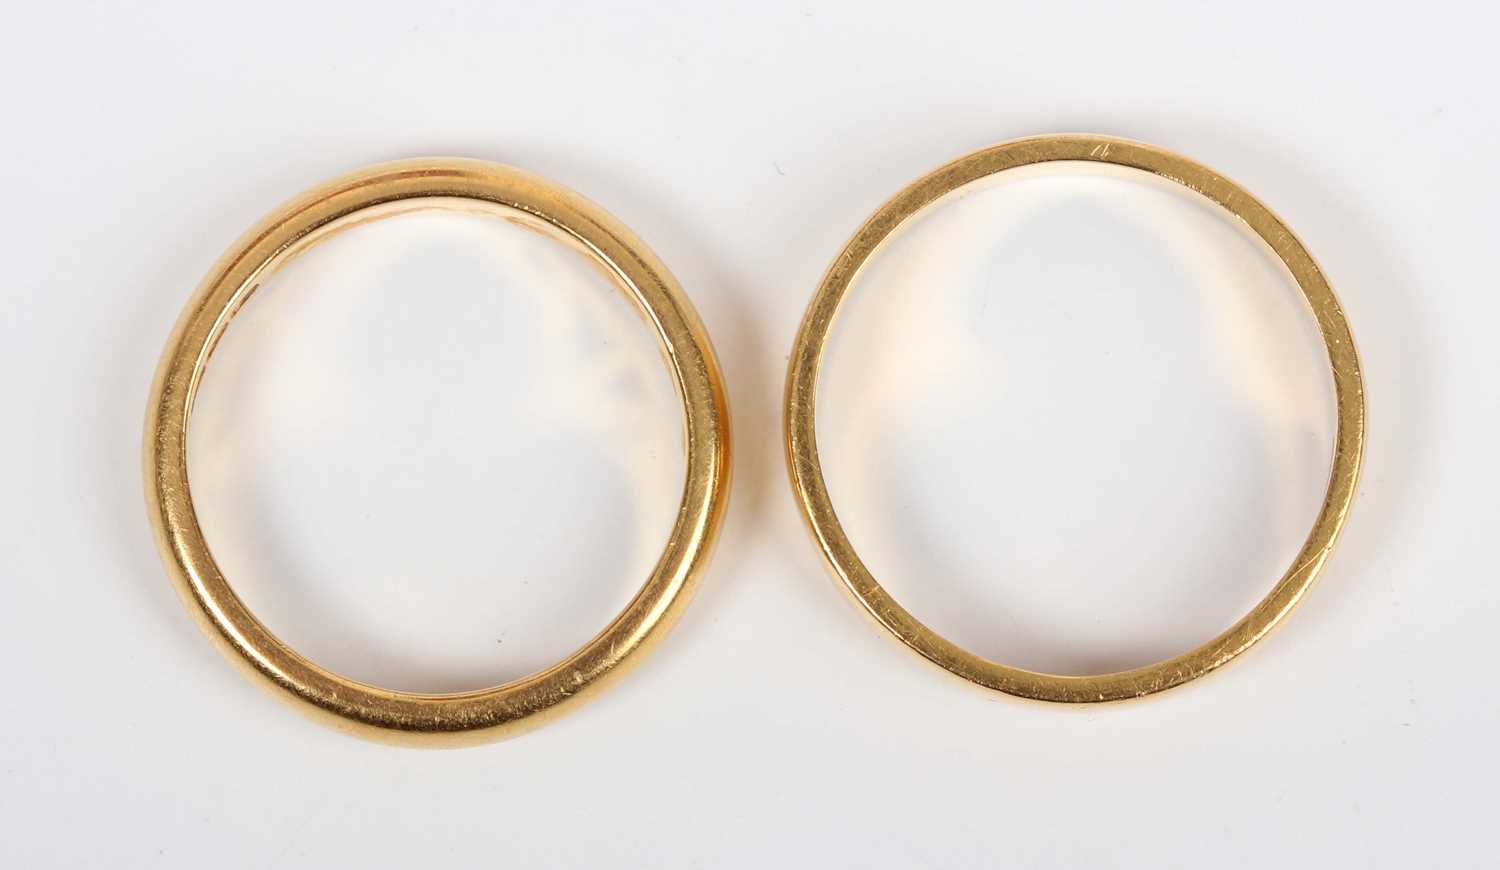 A 22ct gold wedding ring, Birmingham 1932, ring size approx Q, and another 22ct gold wedding ring, - Image 3 of 3